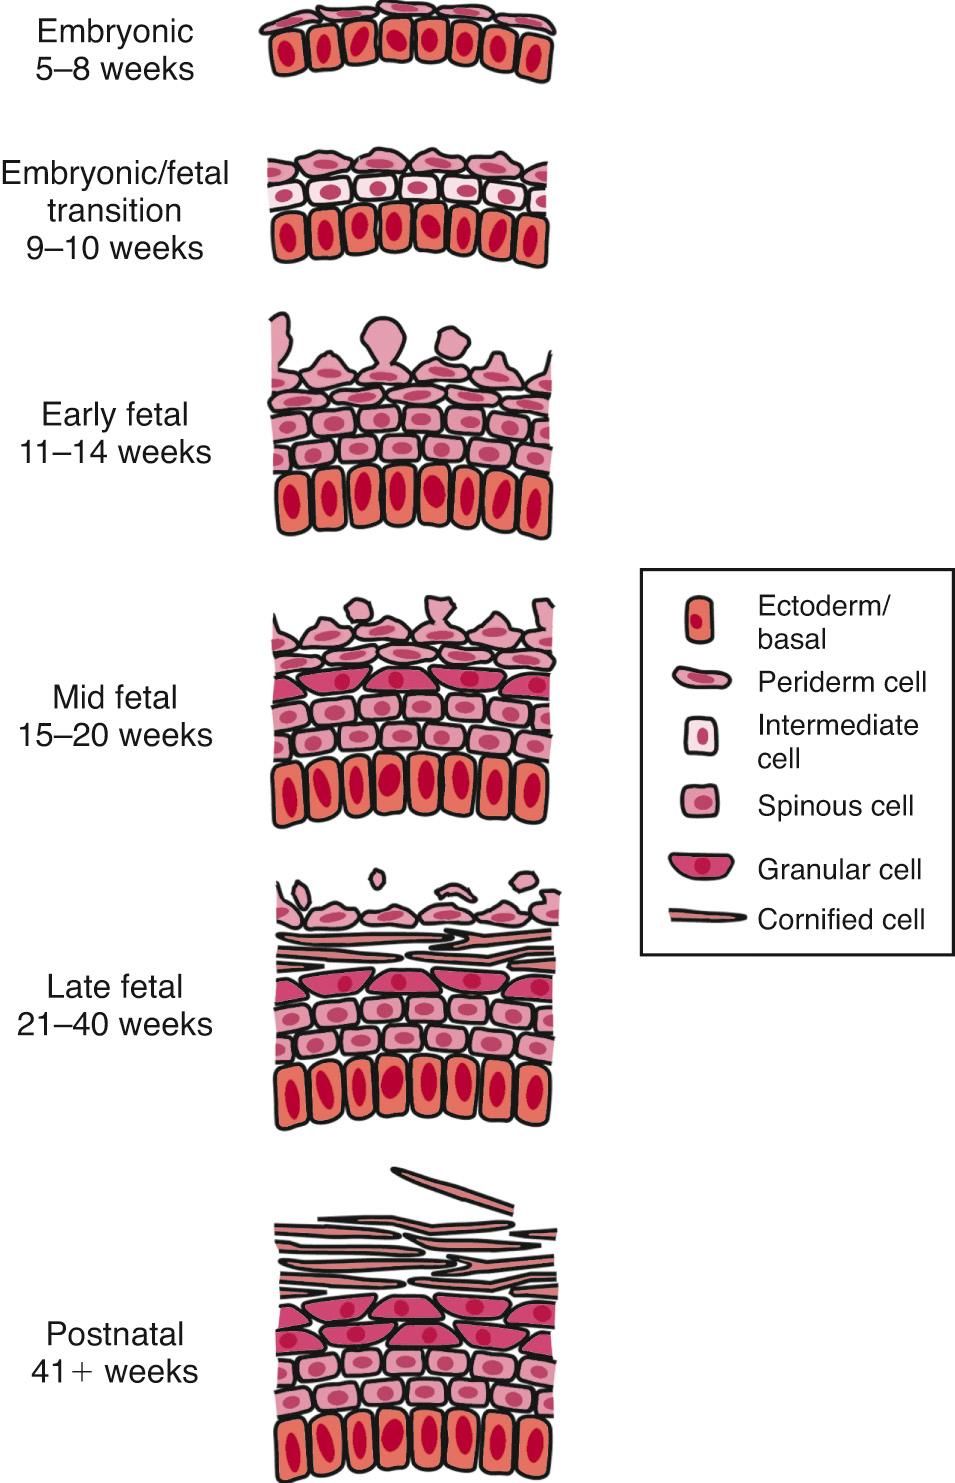 Fig. 94.2, Schematic diagram of the six key stages of epidermal differentiation and development. The epidermis develops from a single layer of undifferentiated ectoderm (5-8 weeks) to a multilayered, stratified, differentiated epithelium with a competent epidermal barrier (40 weeks). The periderm undergoes intense proliferation (11-14 weeks) and forms characteristic blebs and microvilli thought to be functionally important. Regression and disaggregation of the periderm occur concomitant with formation of the vernix caseosa (not shown).